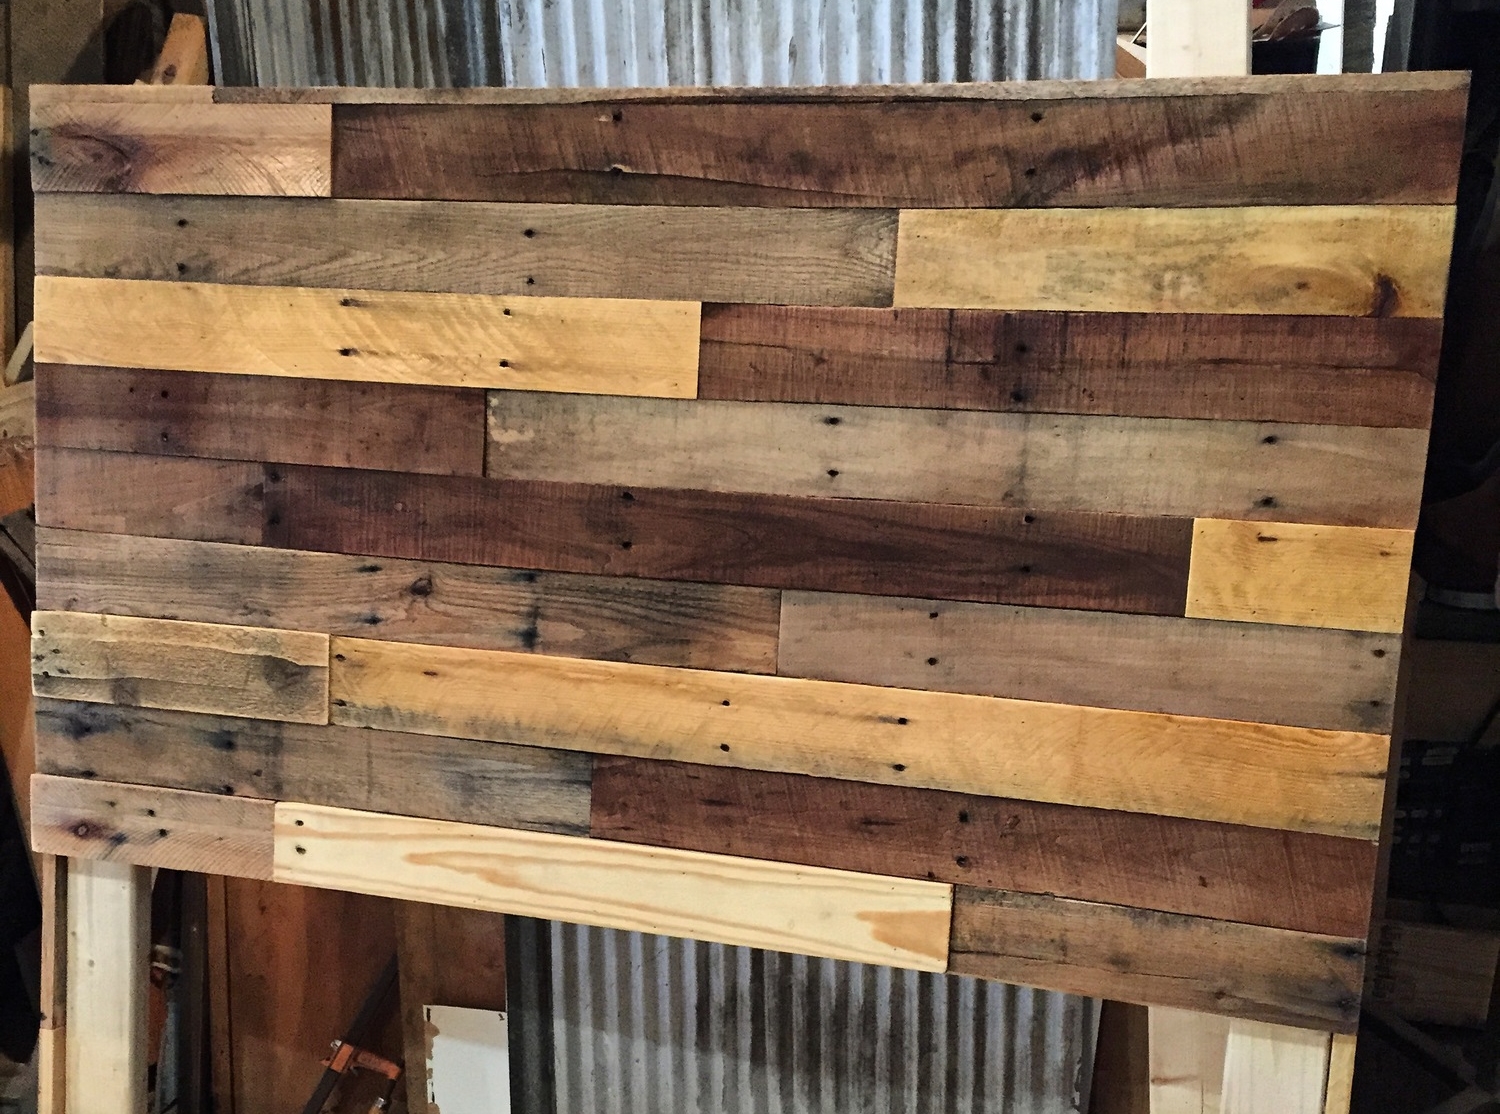 Pallet Wood Headboard Diy Revival, How To Build Bed Frame With Pallets